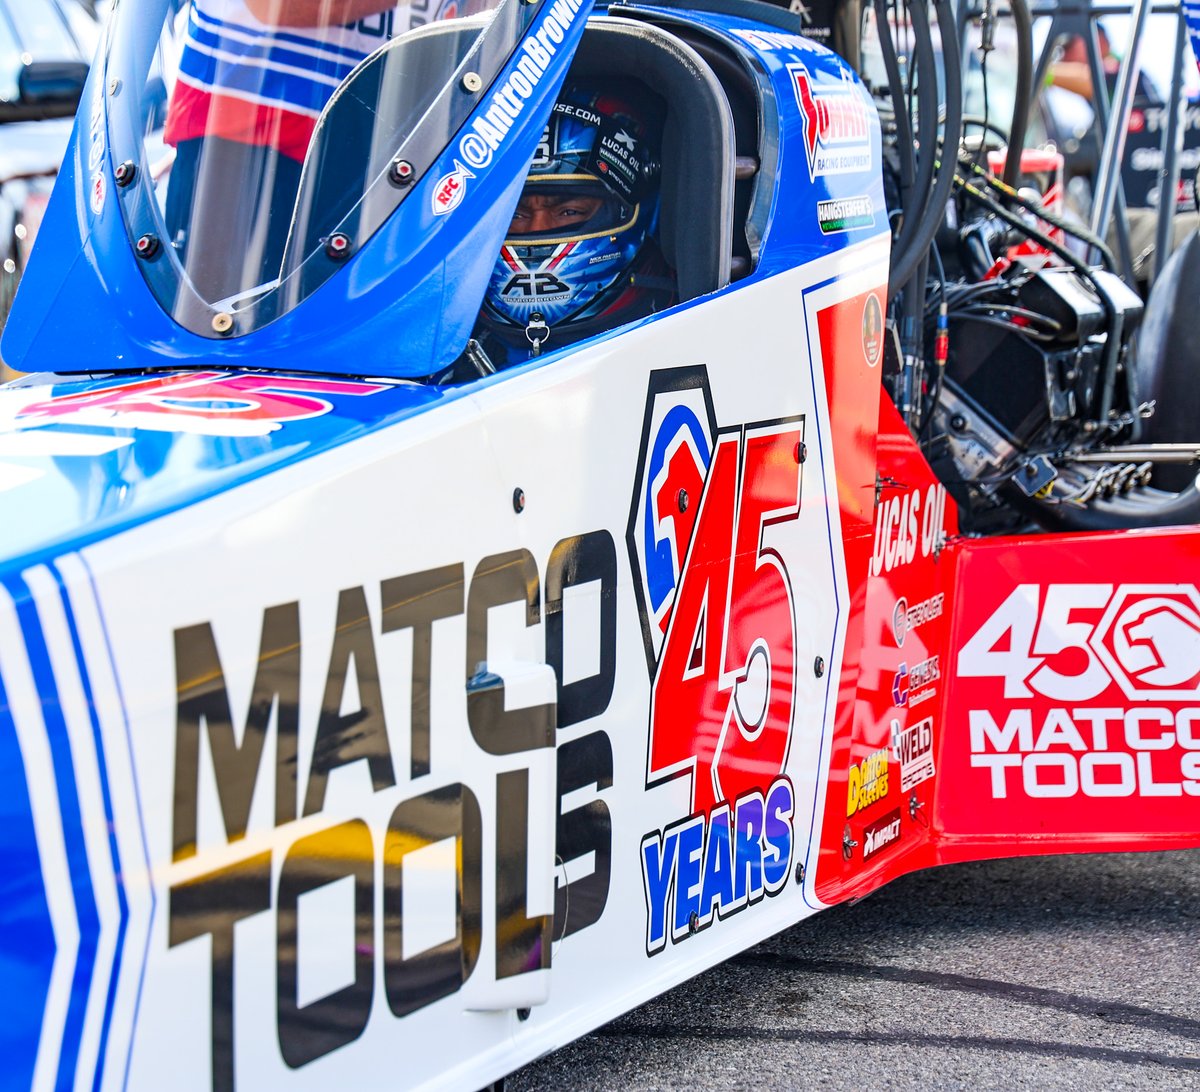 Ready to burn some NITRO @zMAXDragway this weekend here in Charlotte! 

TODAY'S RUNS:
💥 Q1: 5:15
💥 Q2: 7:45

@matcotools ☆ @Lucas_Oil ☆ @ToyotaRacing ☆ @Hangsterfers ☆ @FVPparts 

#NHRAonFox